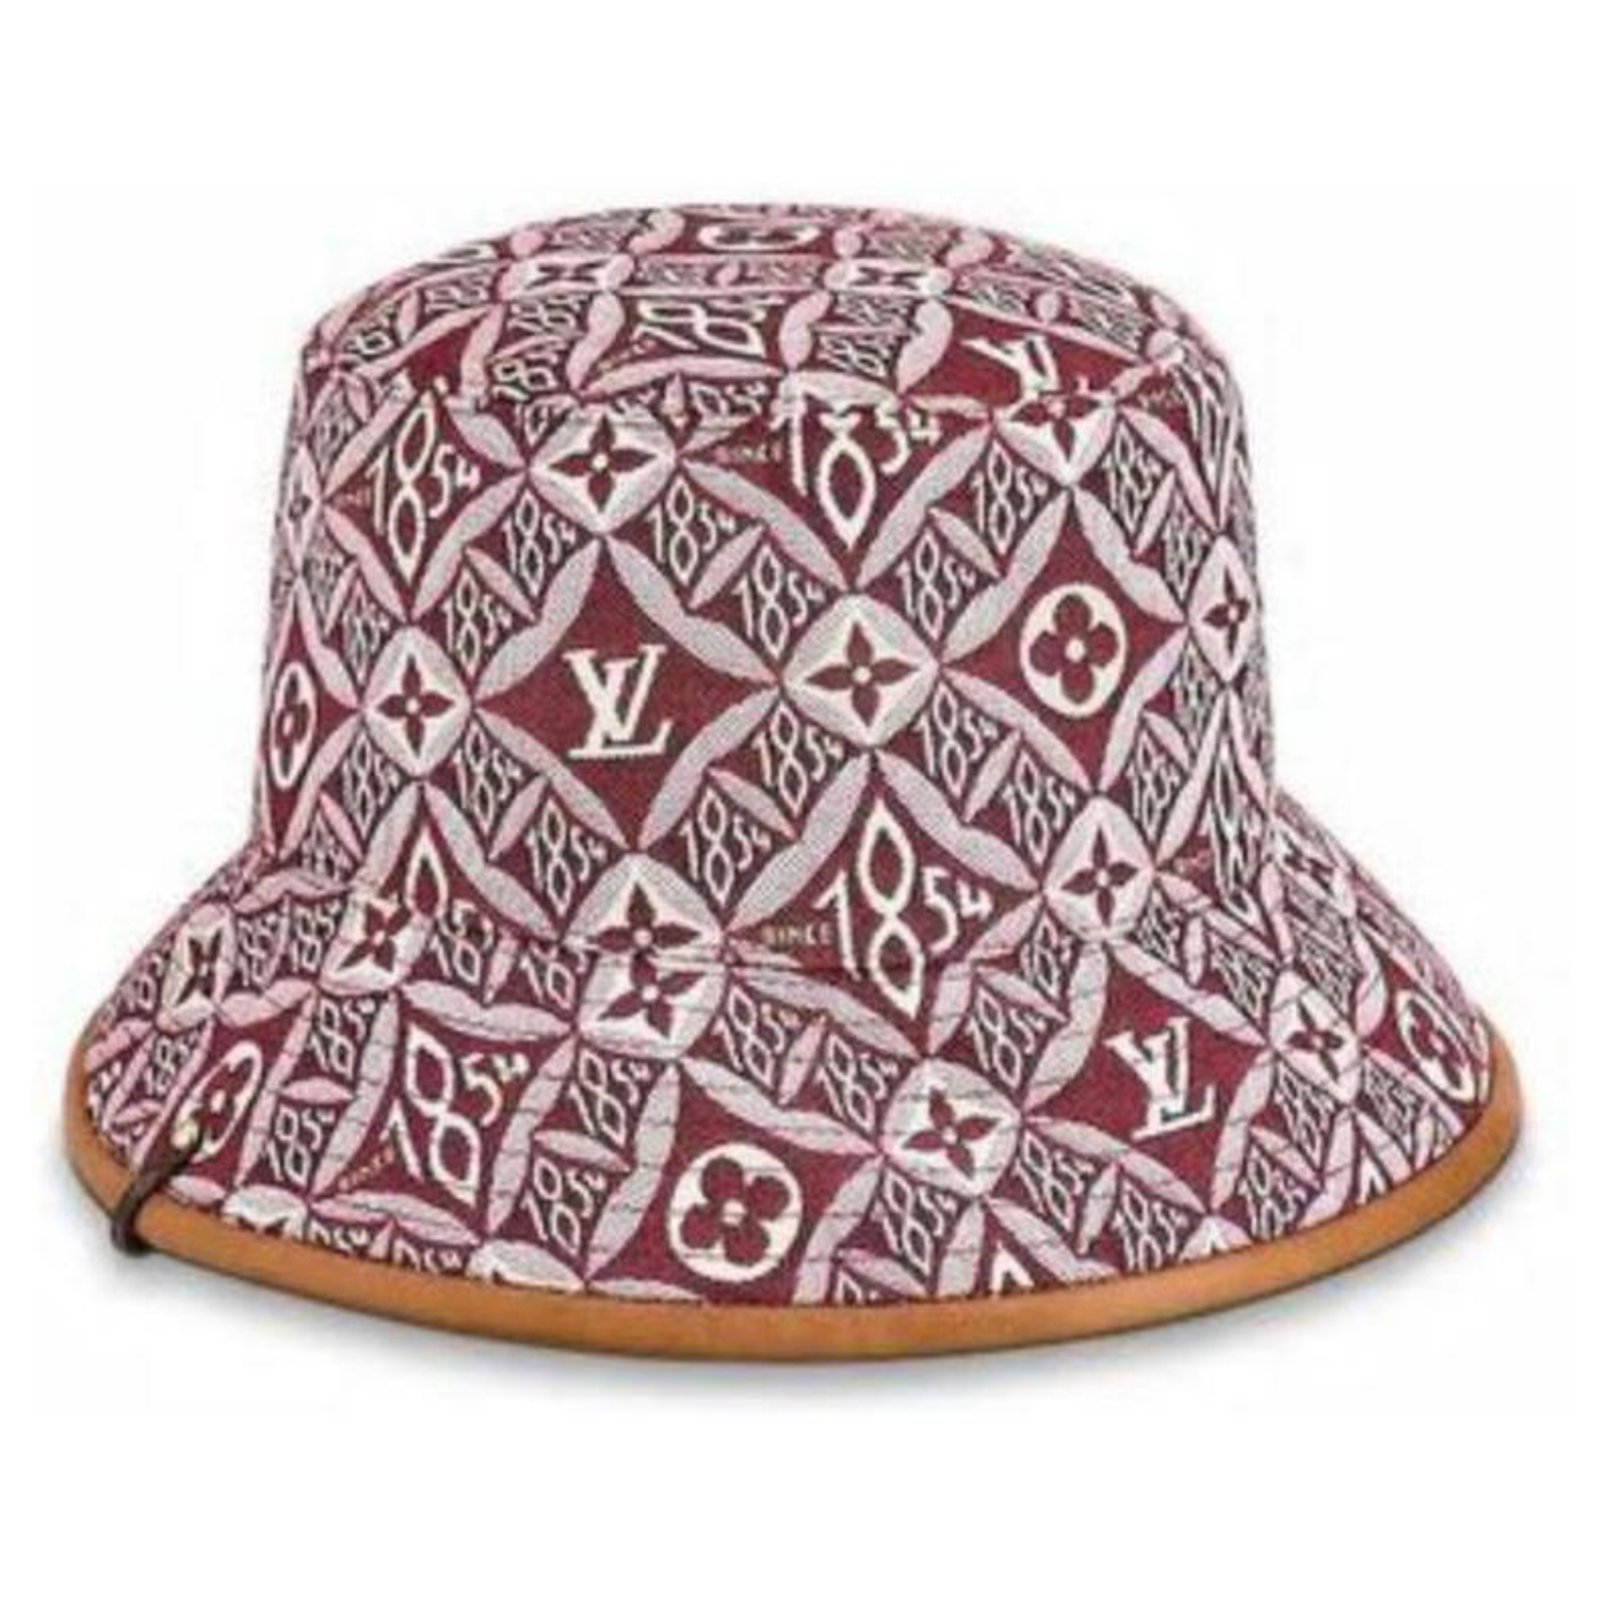 Louis Vuitton Bucket Hat M Size Monogram Nylon Made in Italy Rare Limited  8304AK 